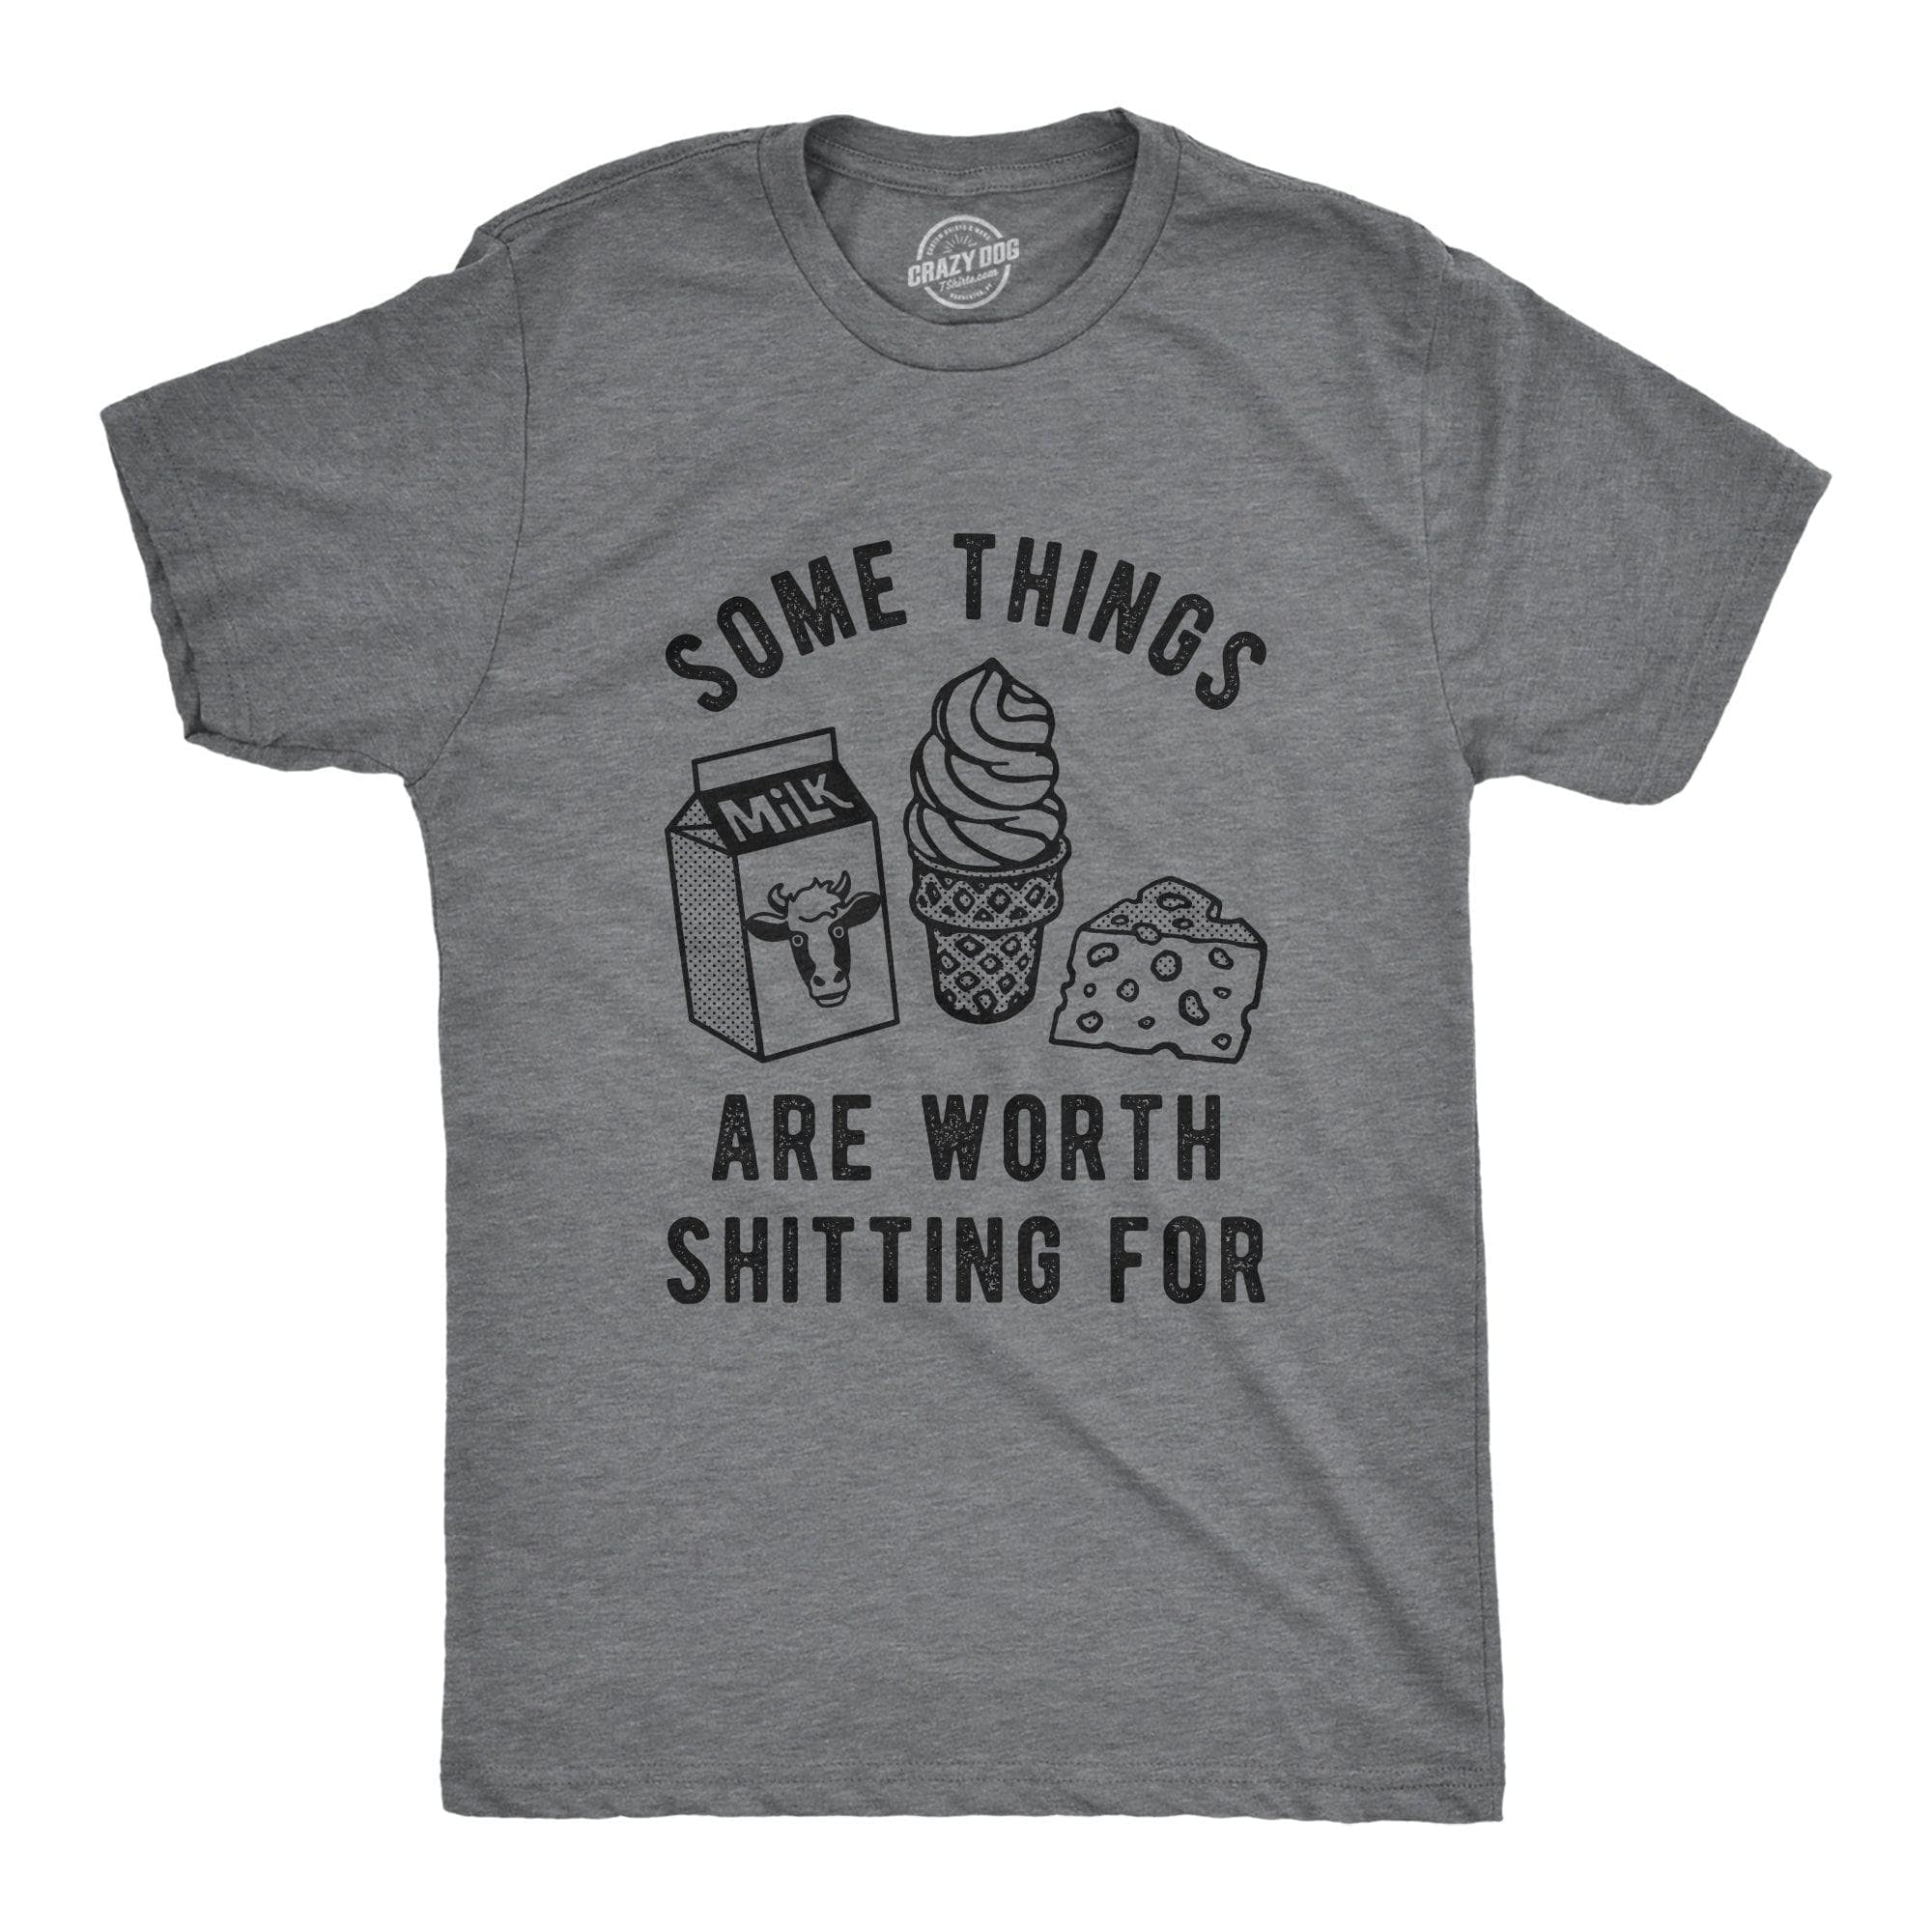 Some Things Are Worth Shitting For Men's Tshirt  -  Crazy Dog T-Shirts